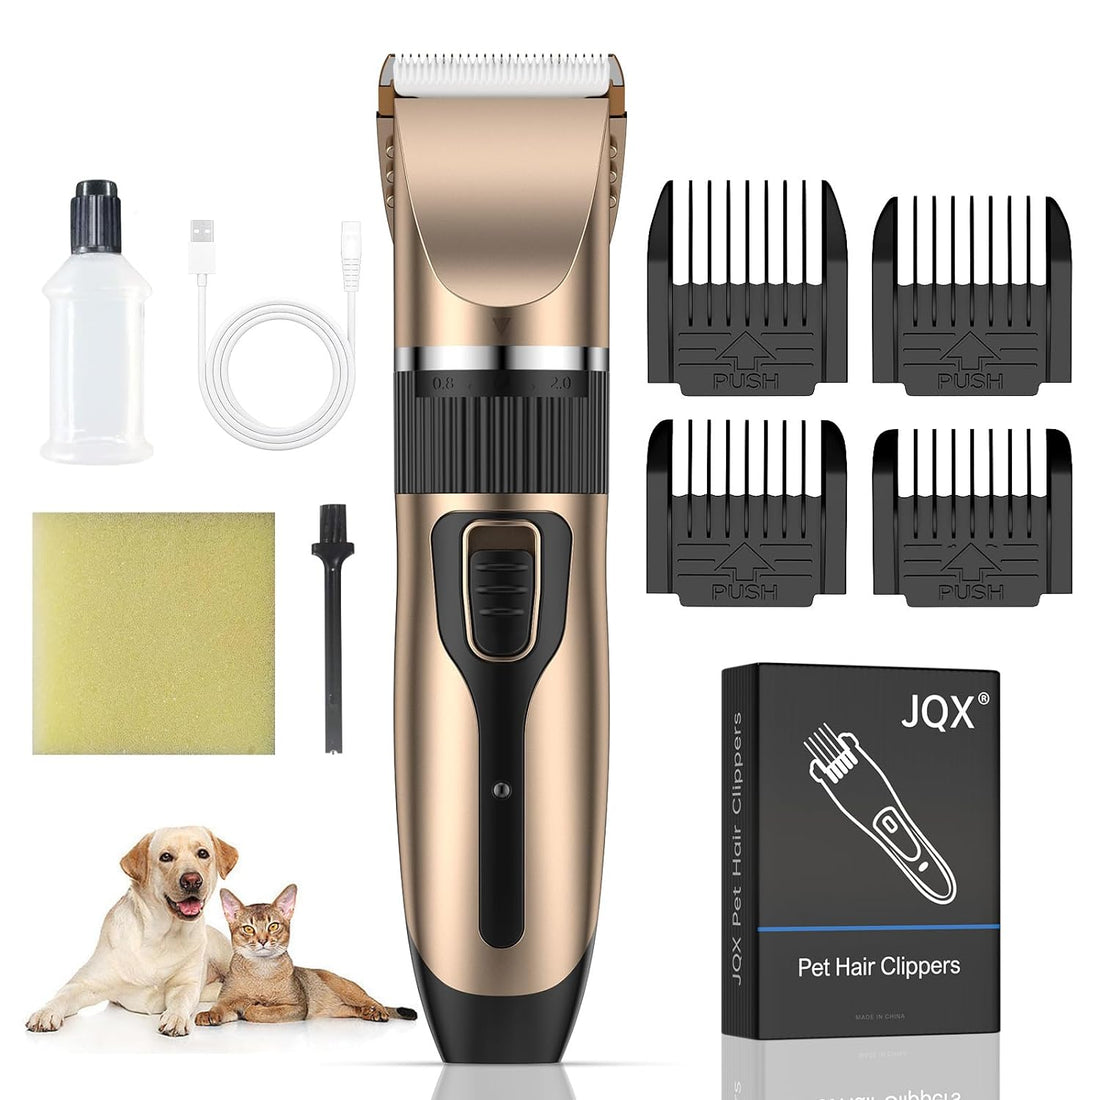 Gvber Dog Clippers with 4 Comb Guides, Professional Dog Grooming Kit, Low Noise High Power, Cat& Dog Hair Trimmer, Pet Grooming Tools for Small & Large Dogs Cats